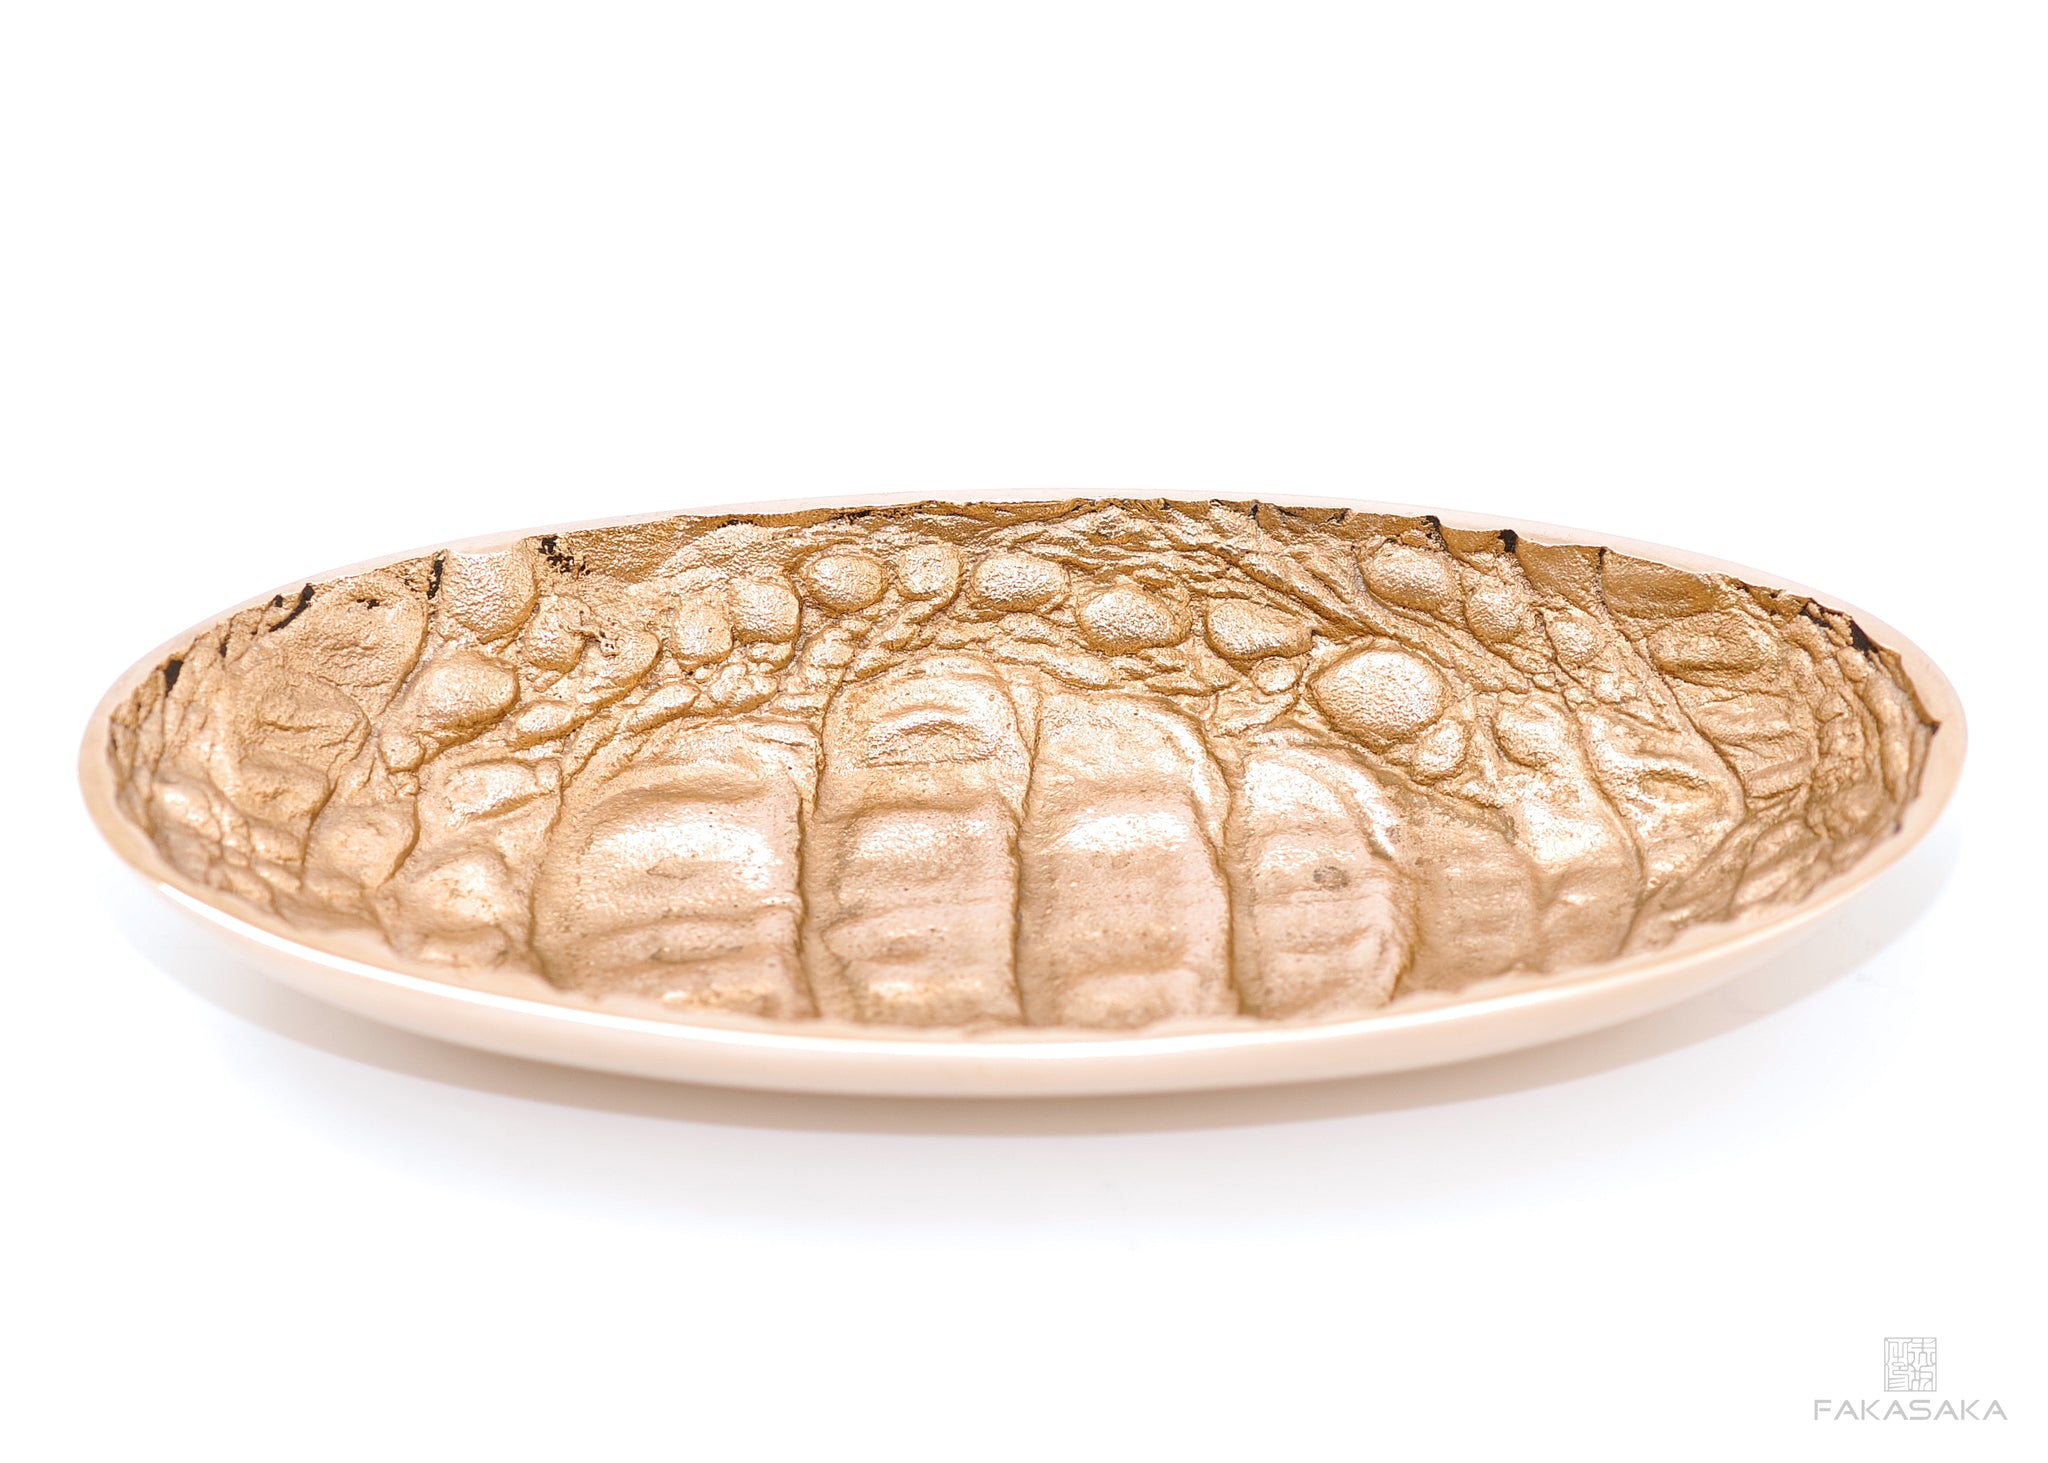 POLLY JEAN<br><br>SMALL TRAY / SMALL BOWL / ASHTRAY / CARD HOLDER / PEN HOLDER<br><br>POLISHED BRONZE